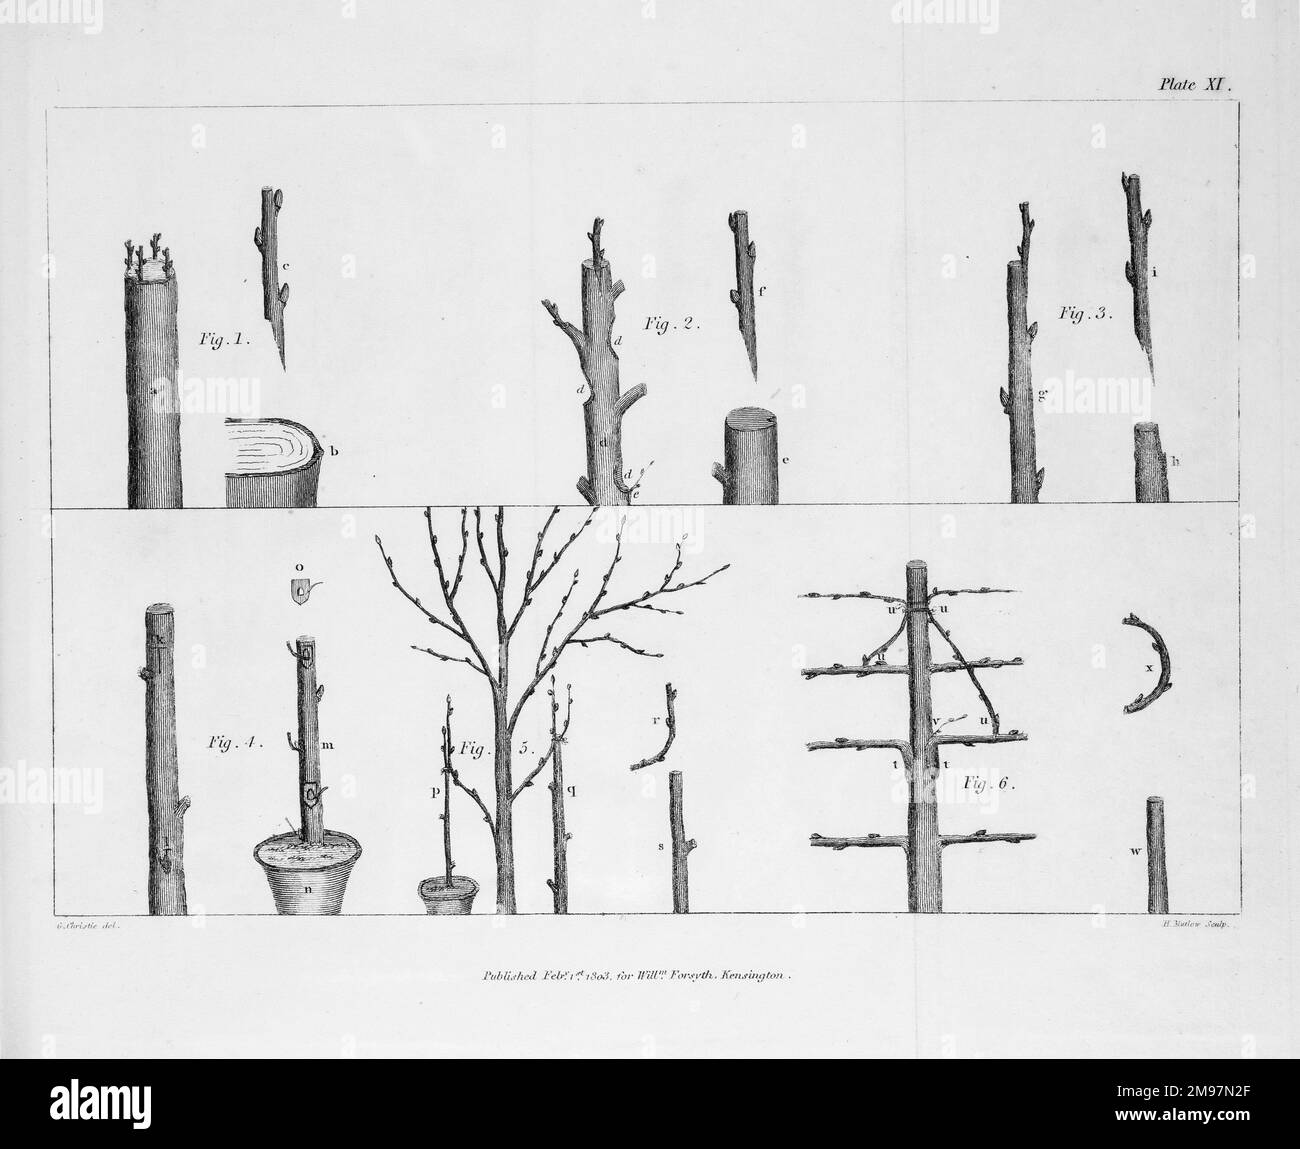 Arboreal grafting processes, 2 copies: B/W & colour. Engraving, probably by H. Mutlow, from William Forsyth, A treatise on the culture and management of fruit trees. Plate XI. Stock Photo